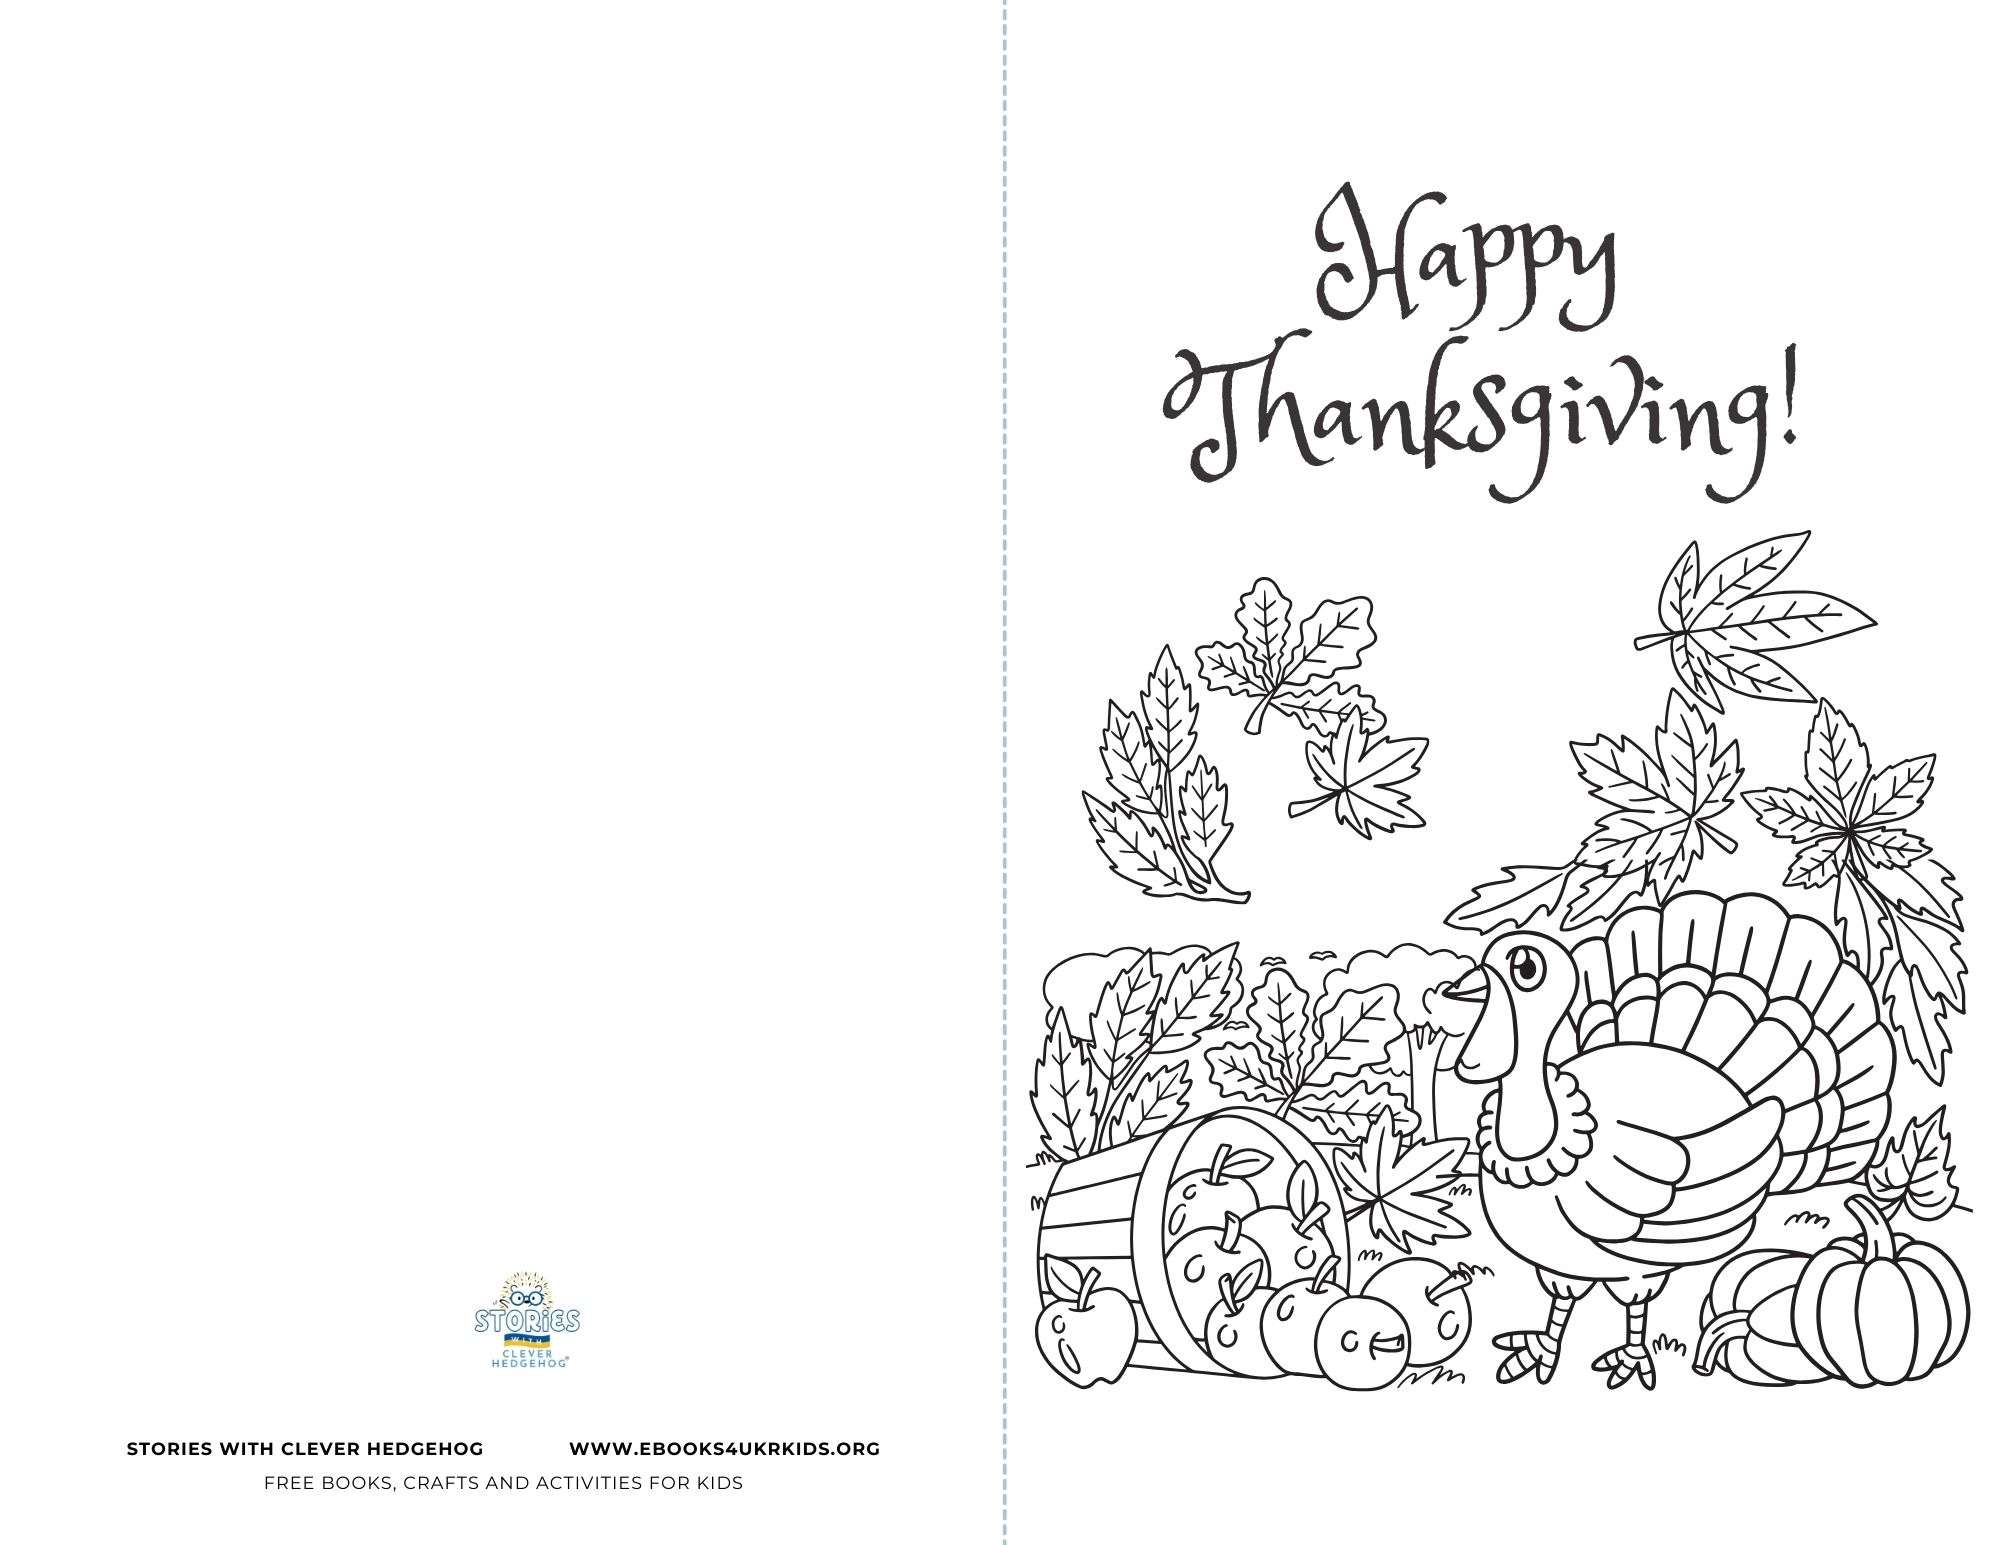 Thanksgiving greeting card for kids,
Fun fall activities with Clever Hedgehog